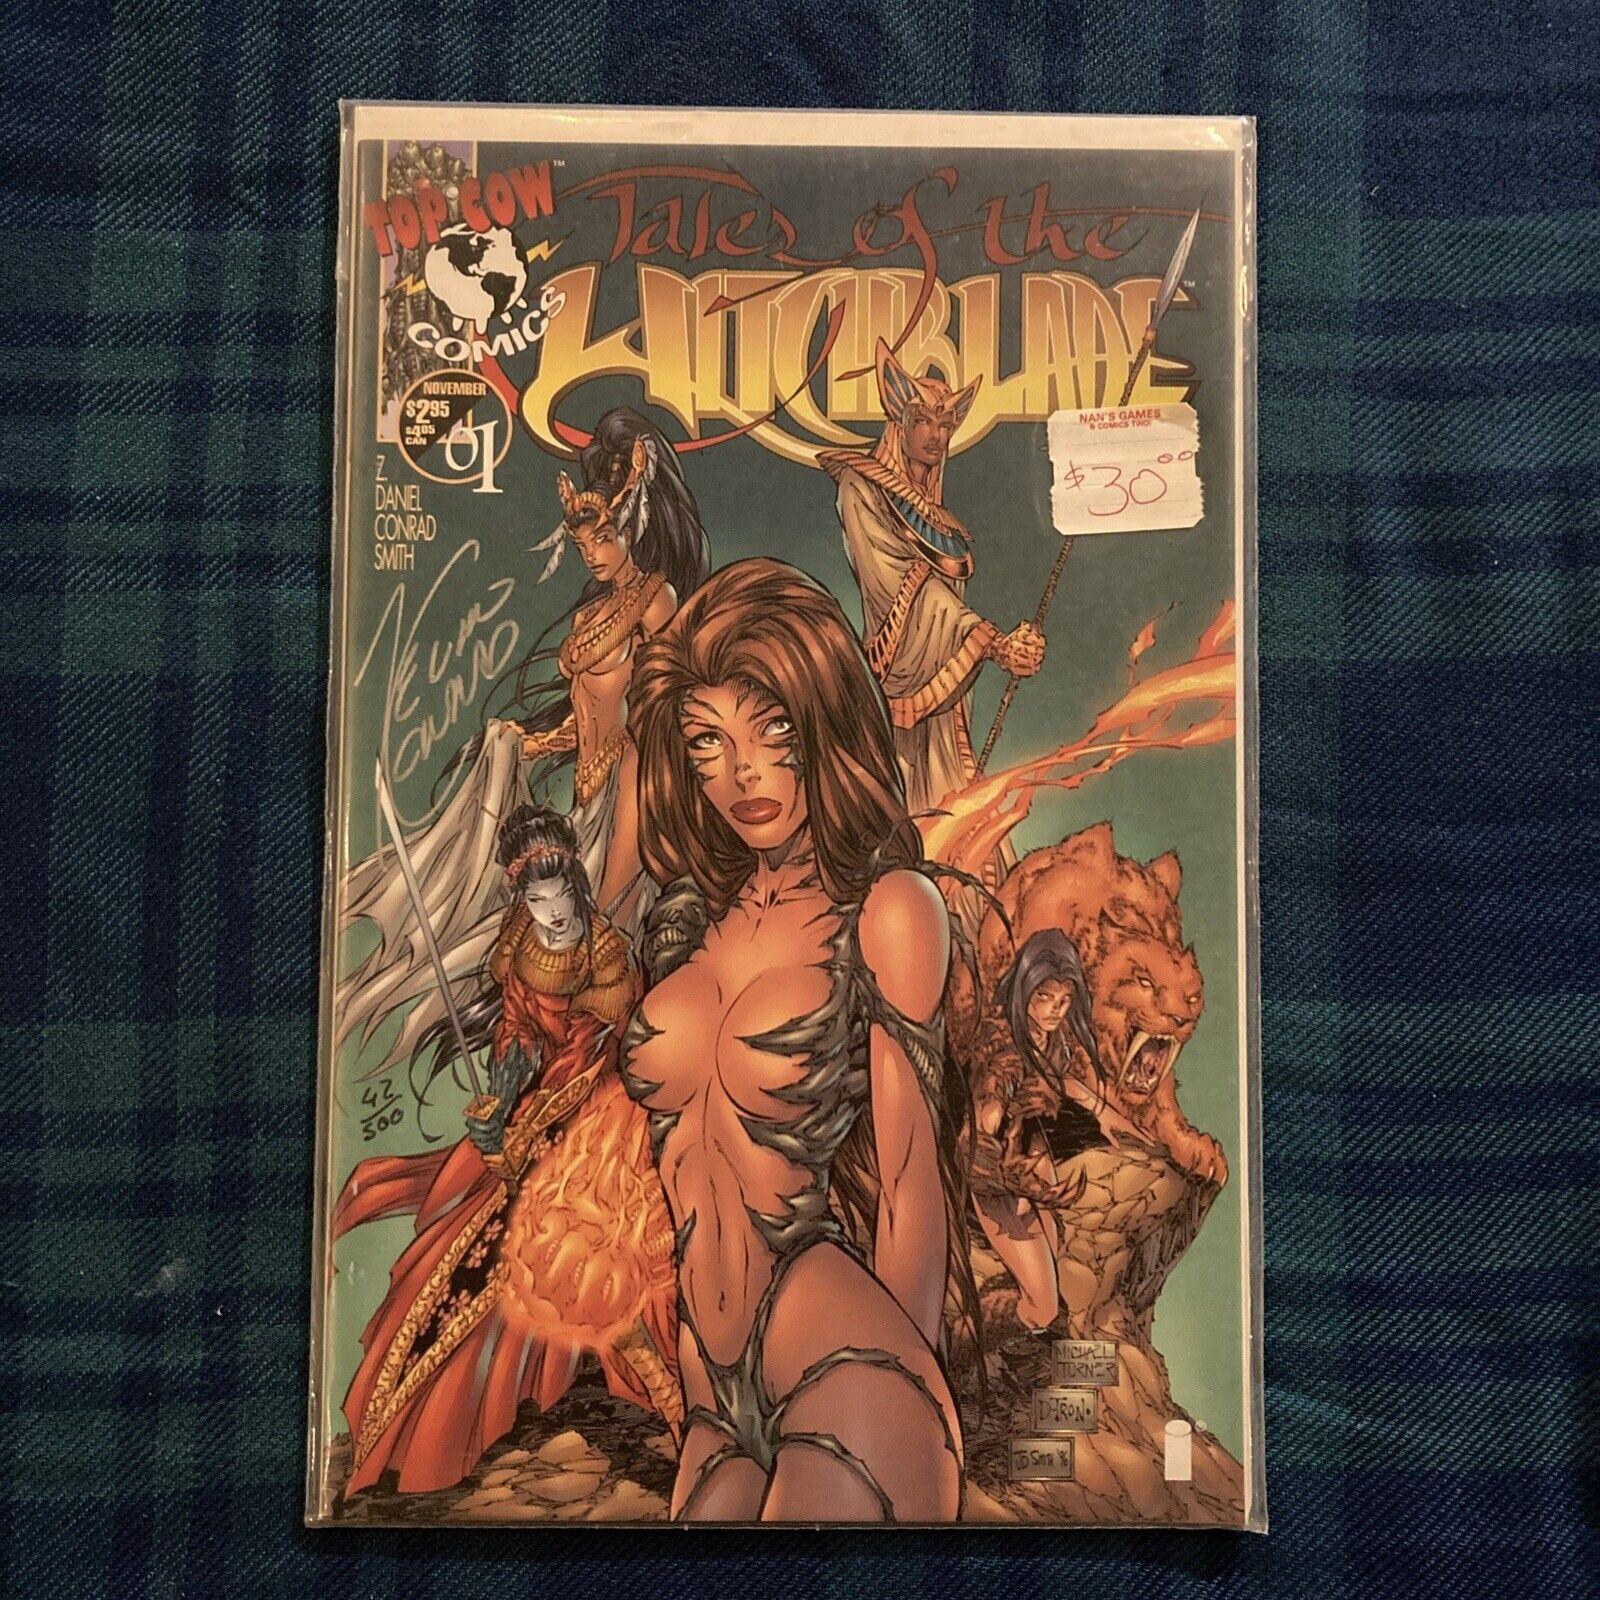 Tales of the Witchblade #1 w/ Alternate Cover - Signed w/ COA #42 / 500